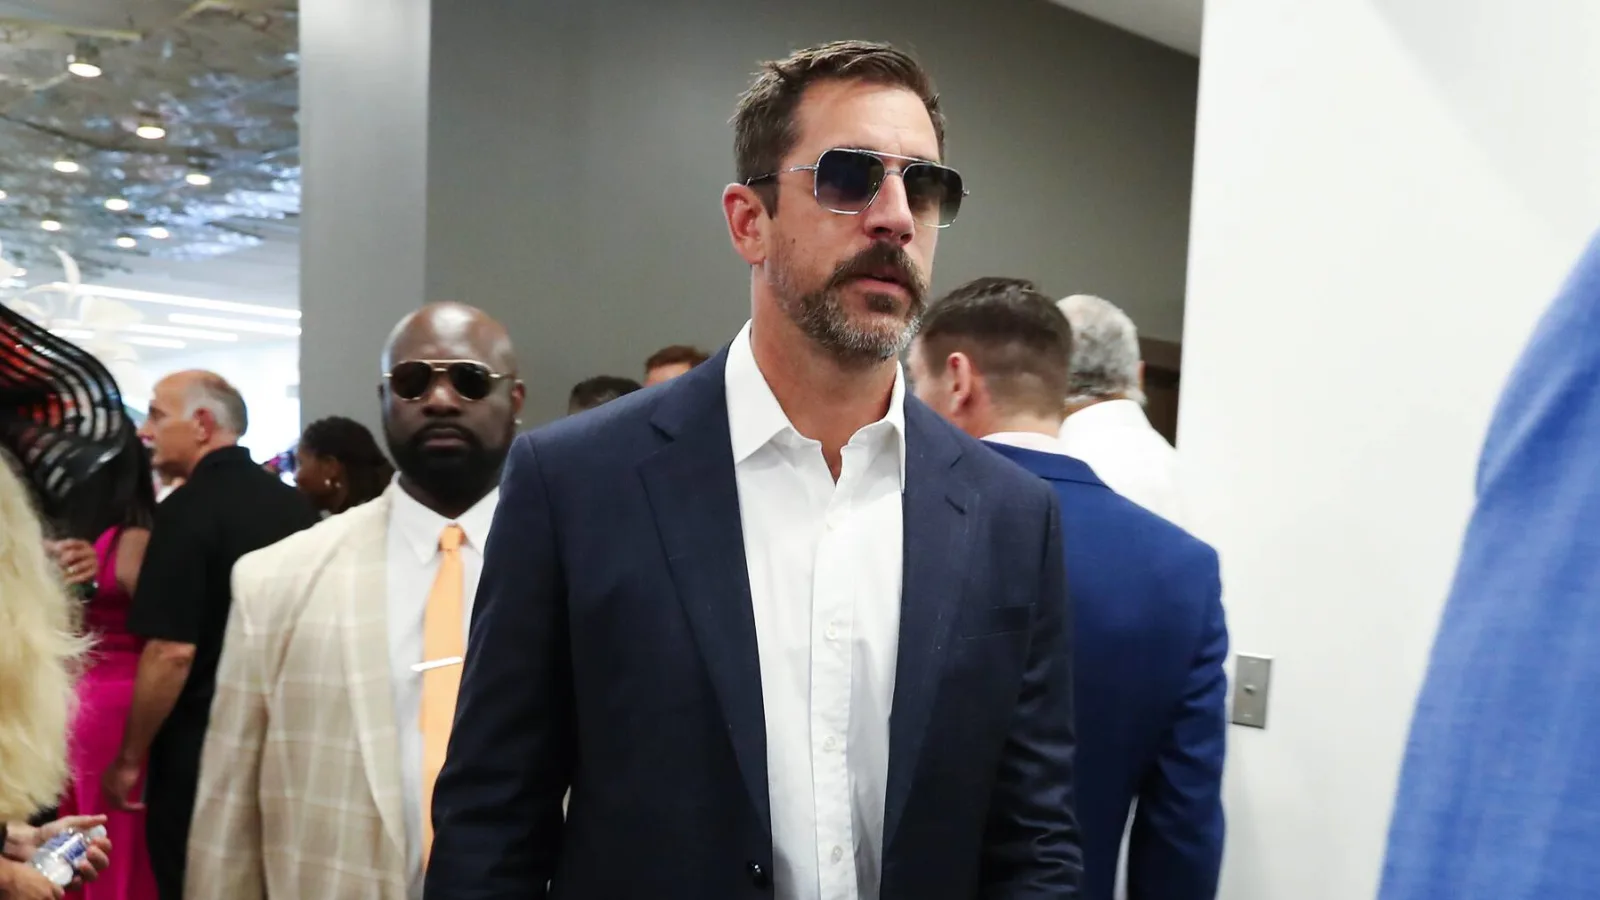 Aaron Rodgers on Controversial Comments: Jets, Distractions, and Football Focus